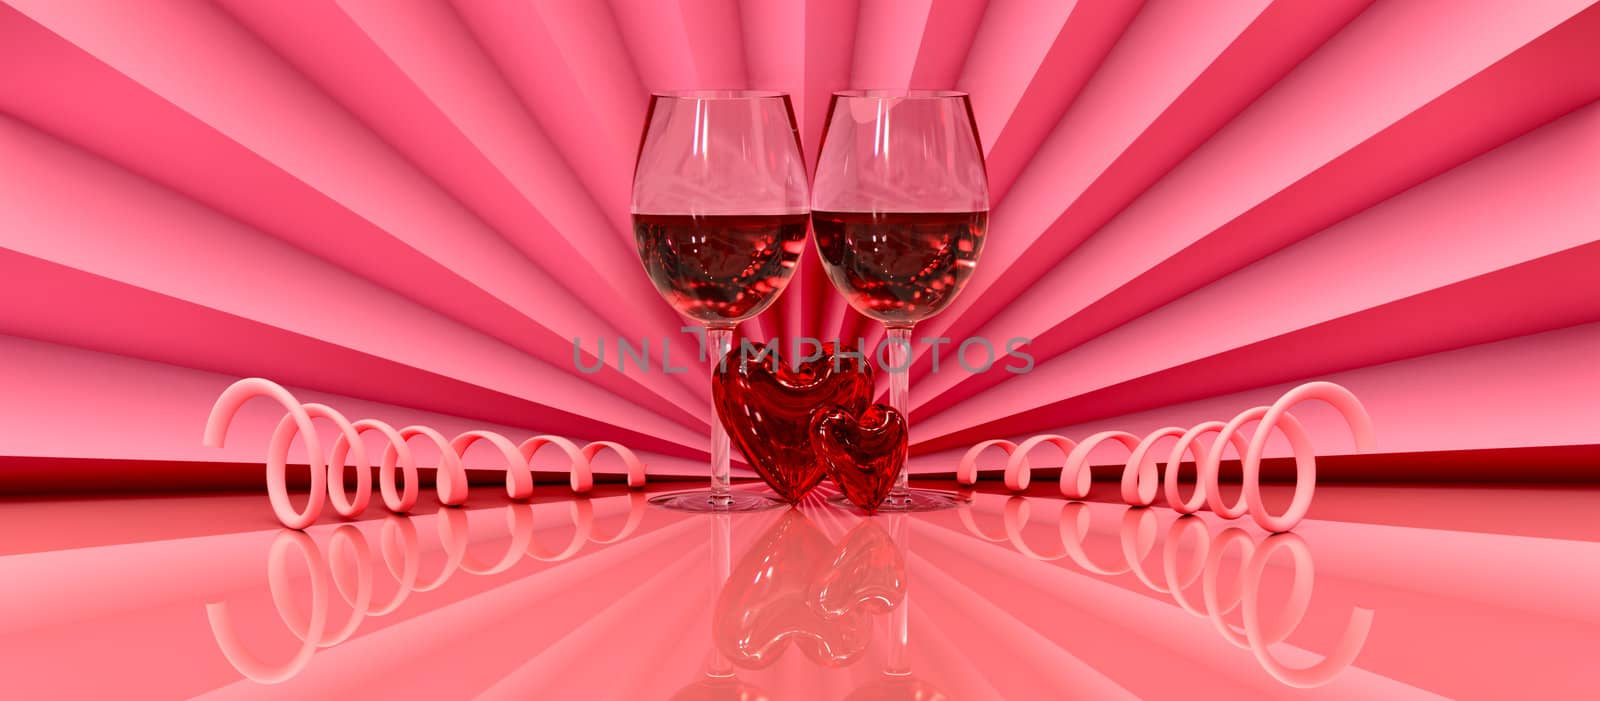 two wineglass with two hearts as symbol love on valentine's day on February, 14th